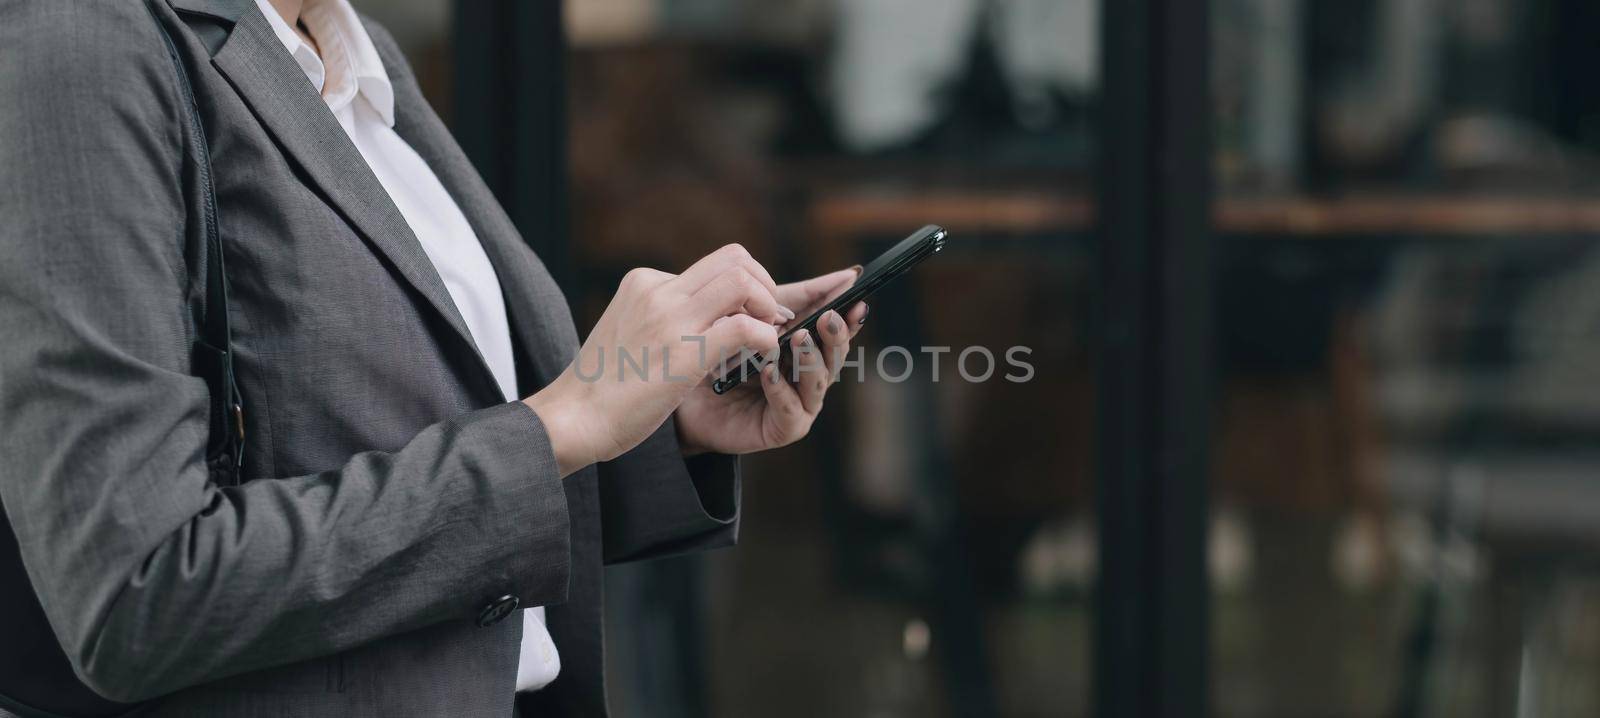 woman using apps on a mobile touchscreen smartphone. Concept for using technology, shopping online, mobile apps, texting, addiction